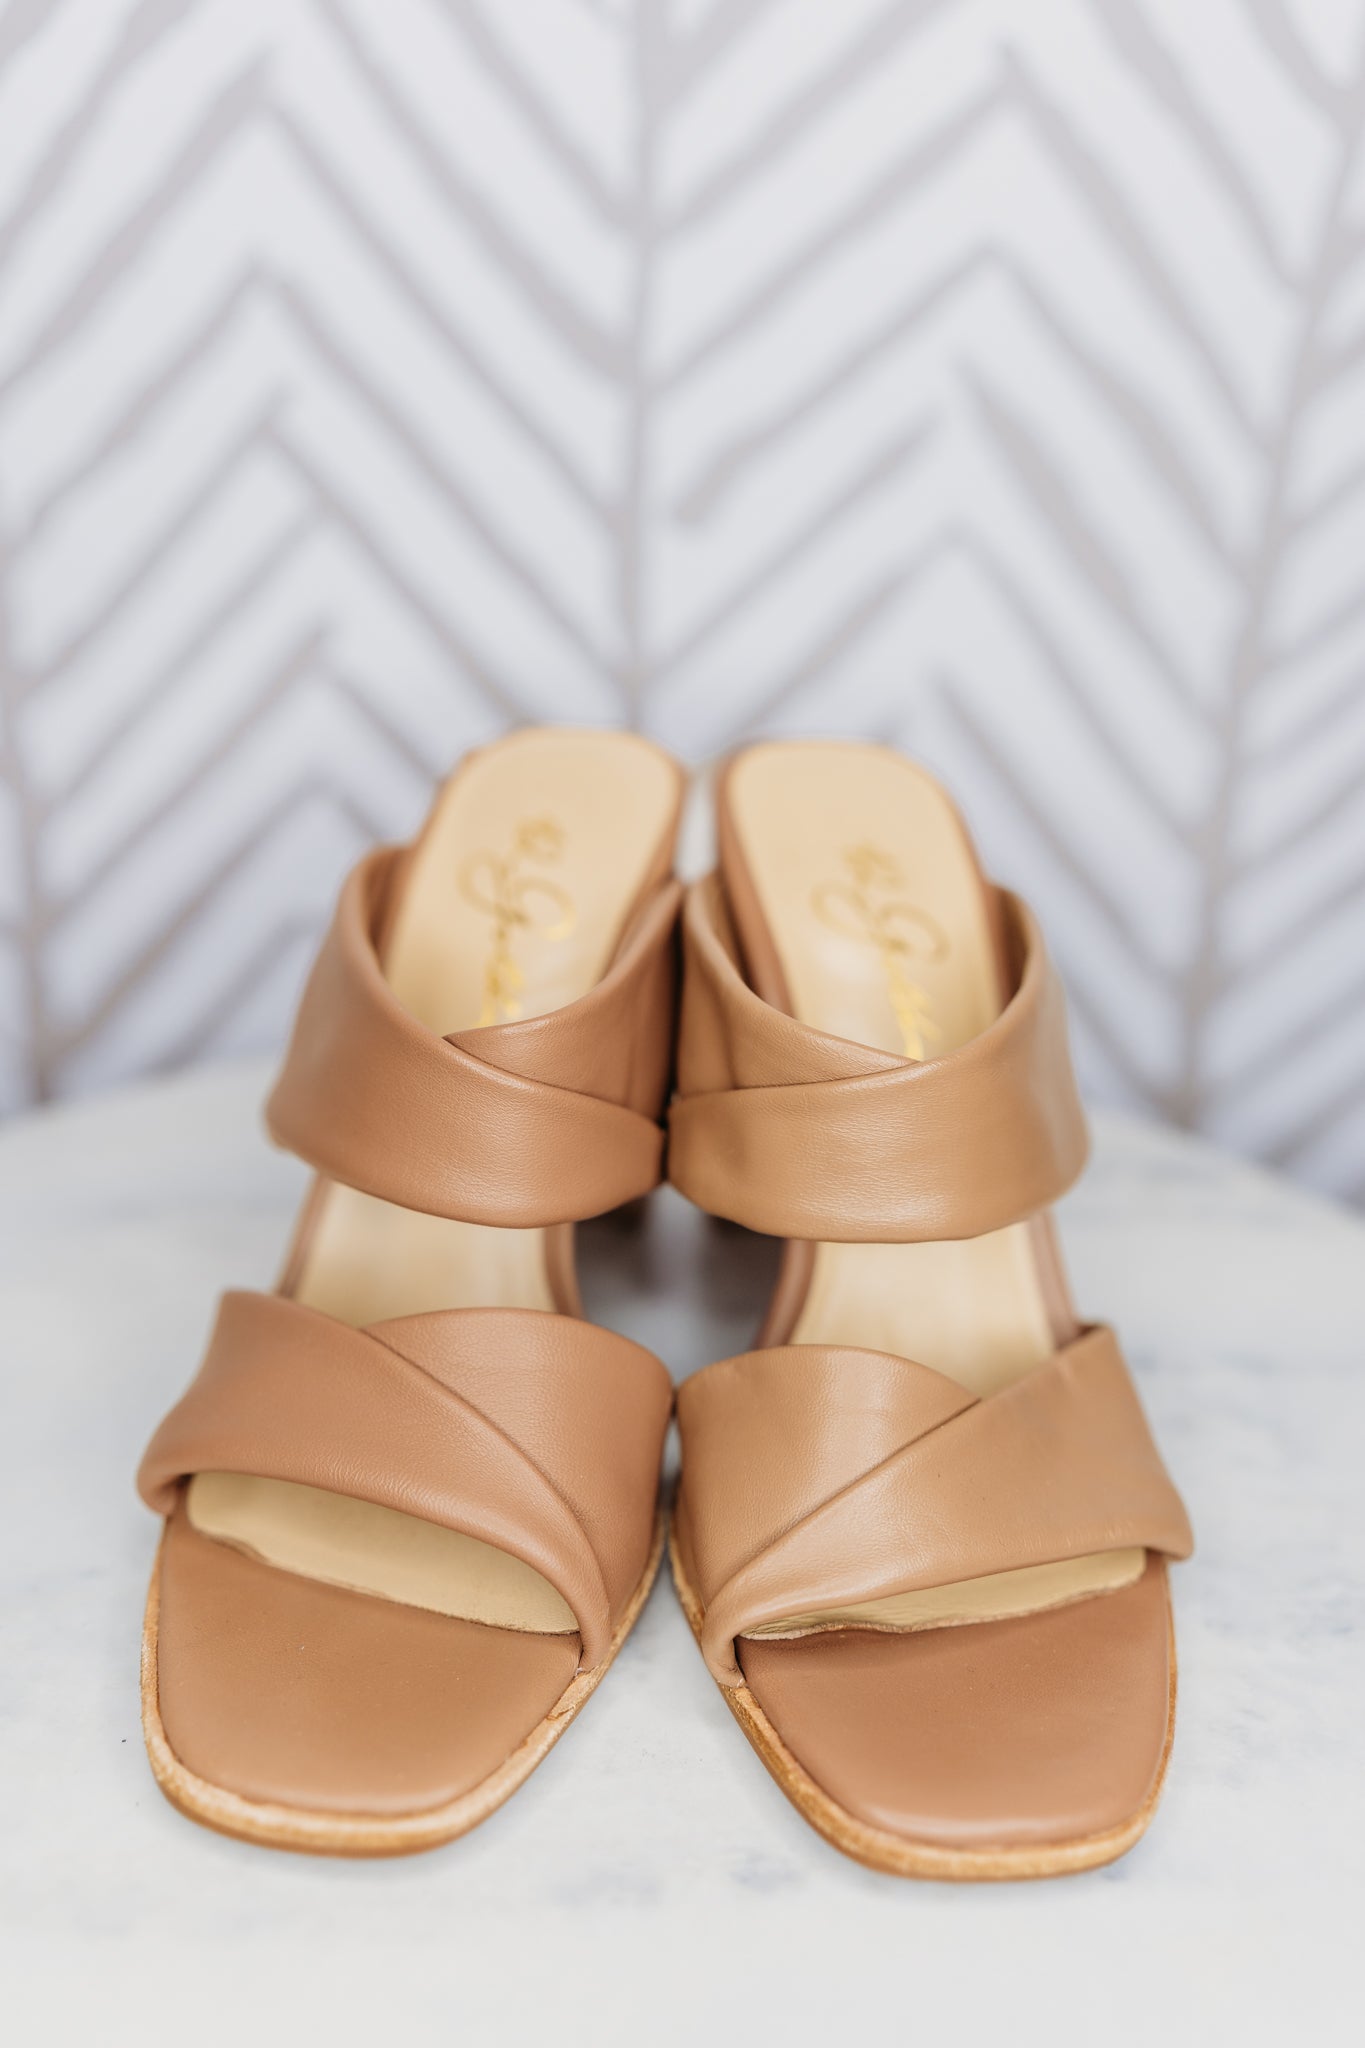 The Leven Leather Heel in Tan by 42Gold